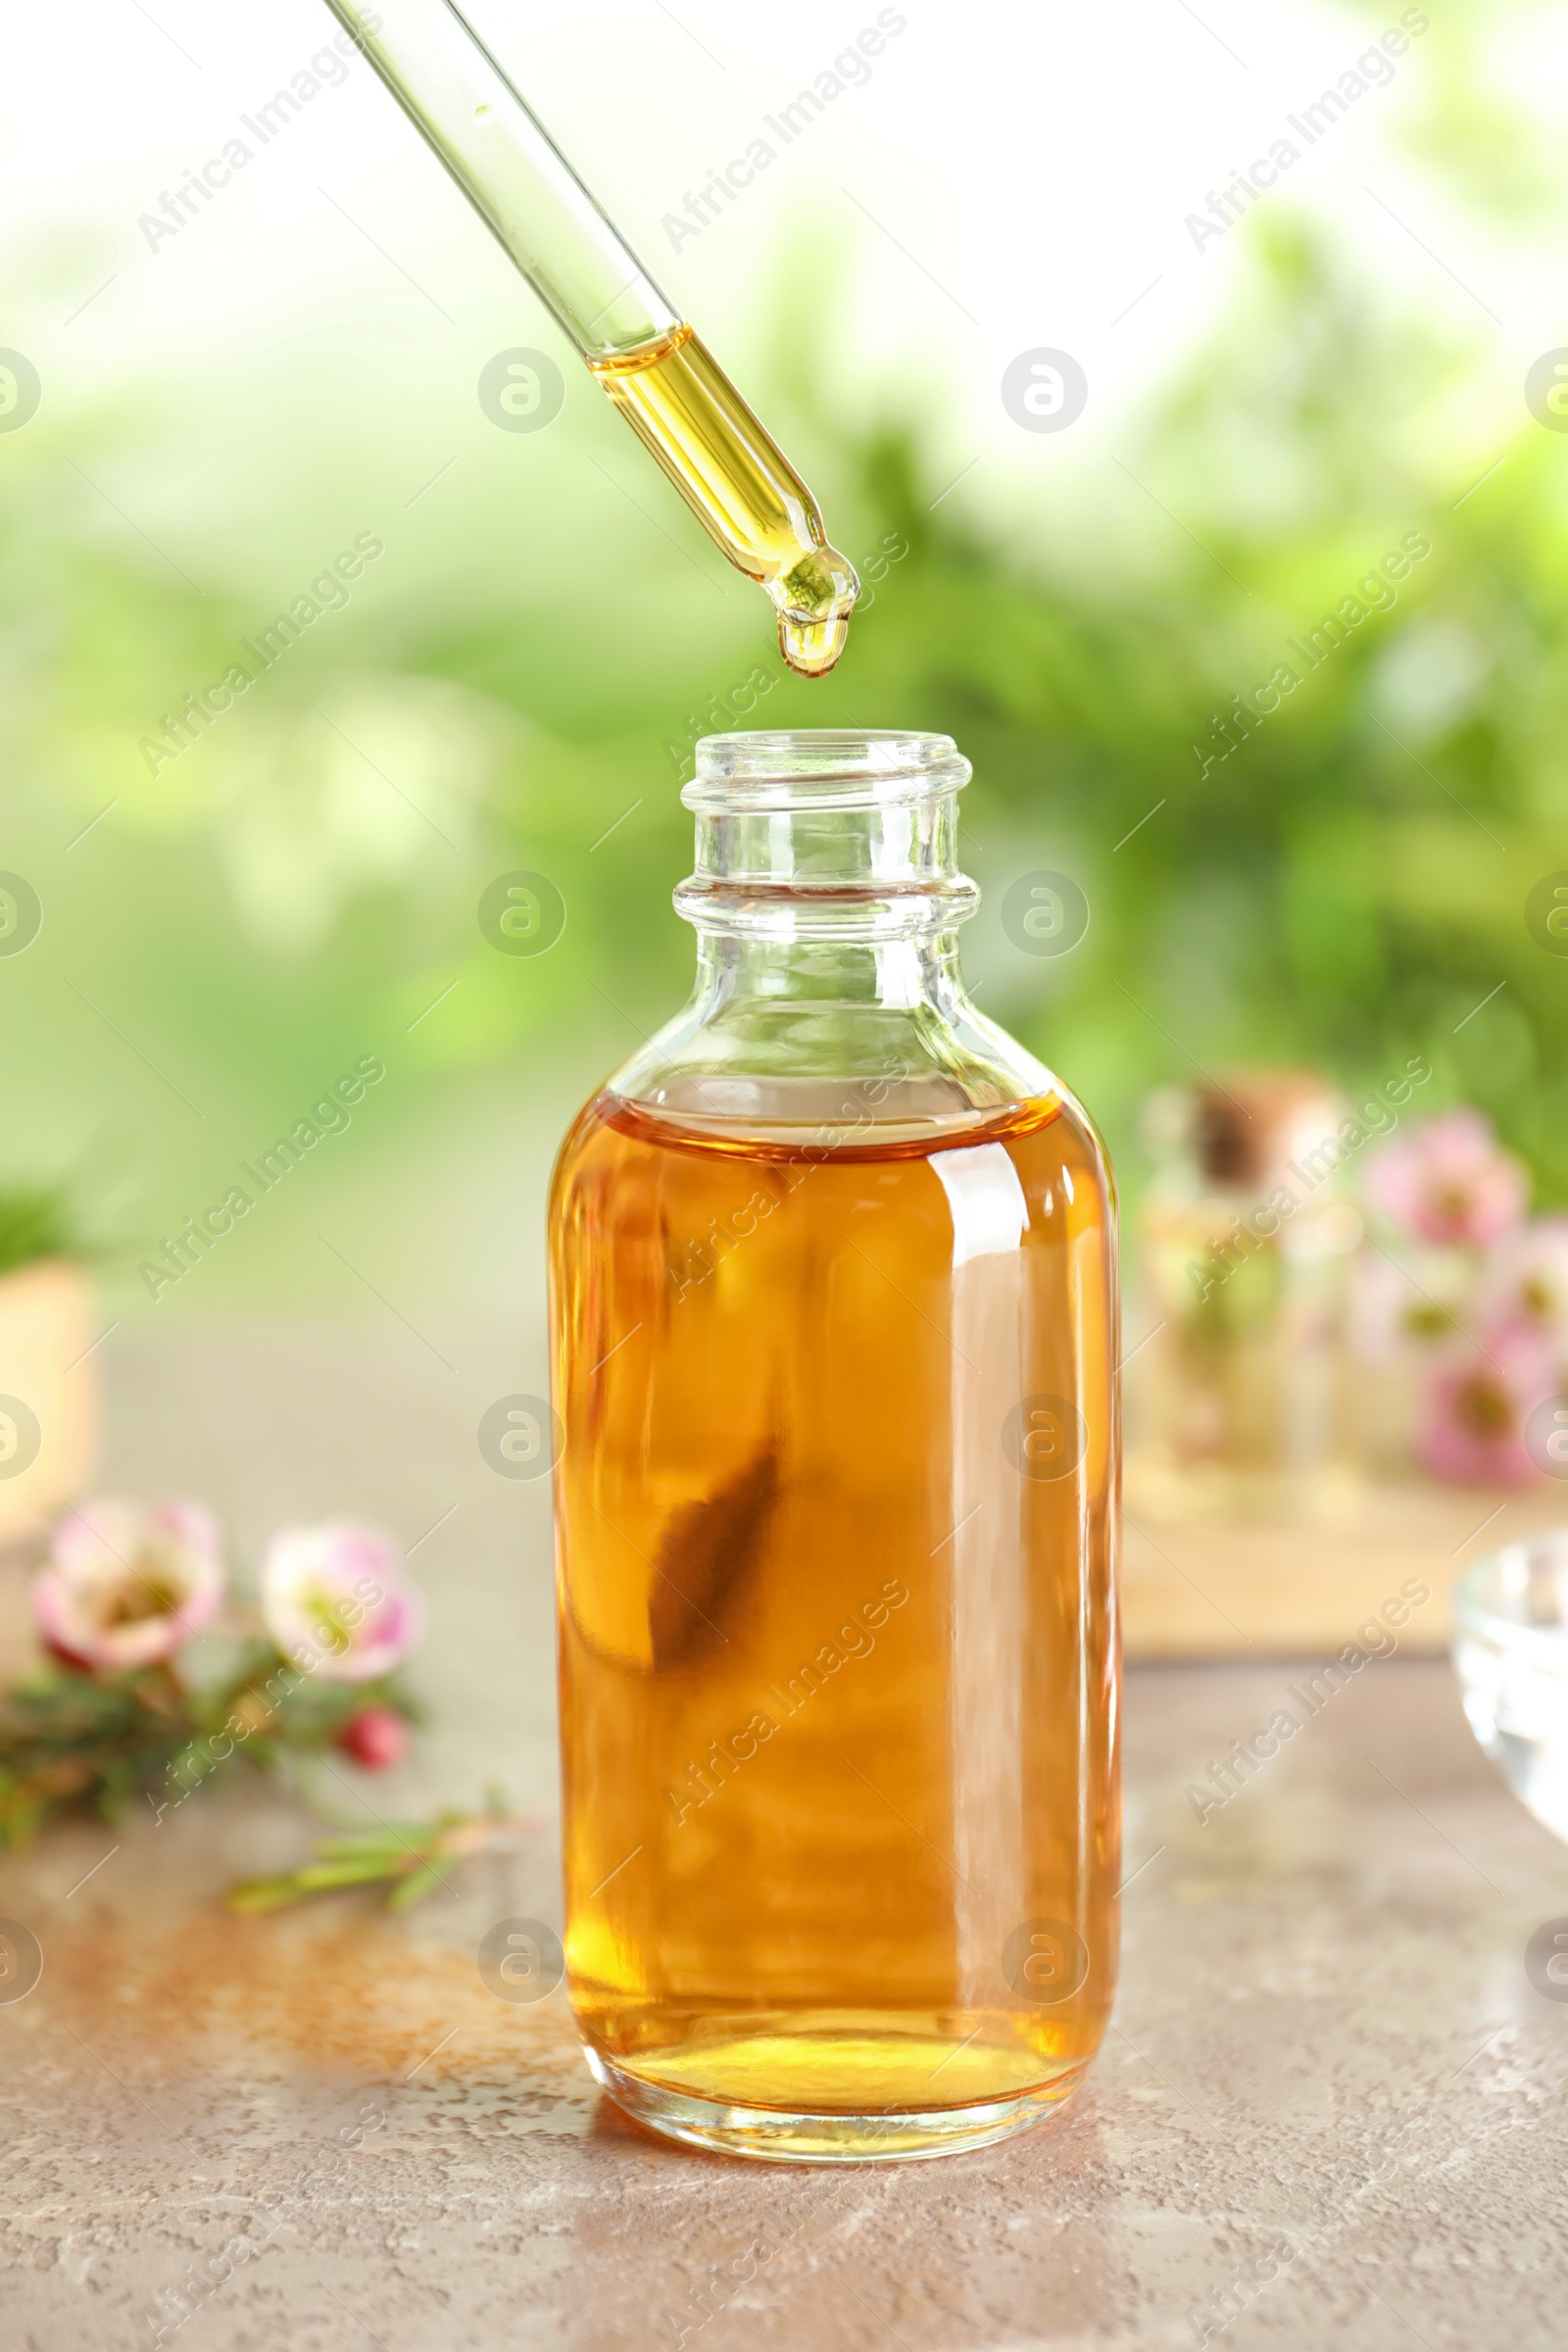 Photo of Dripping natural tea tree essential oil into bottle on table